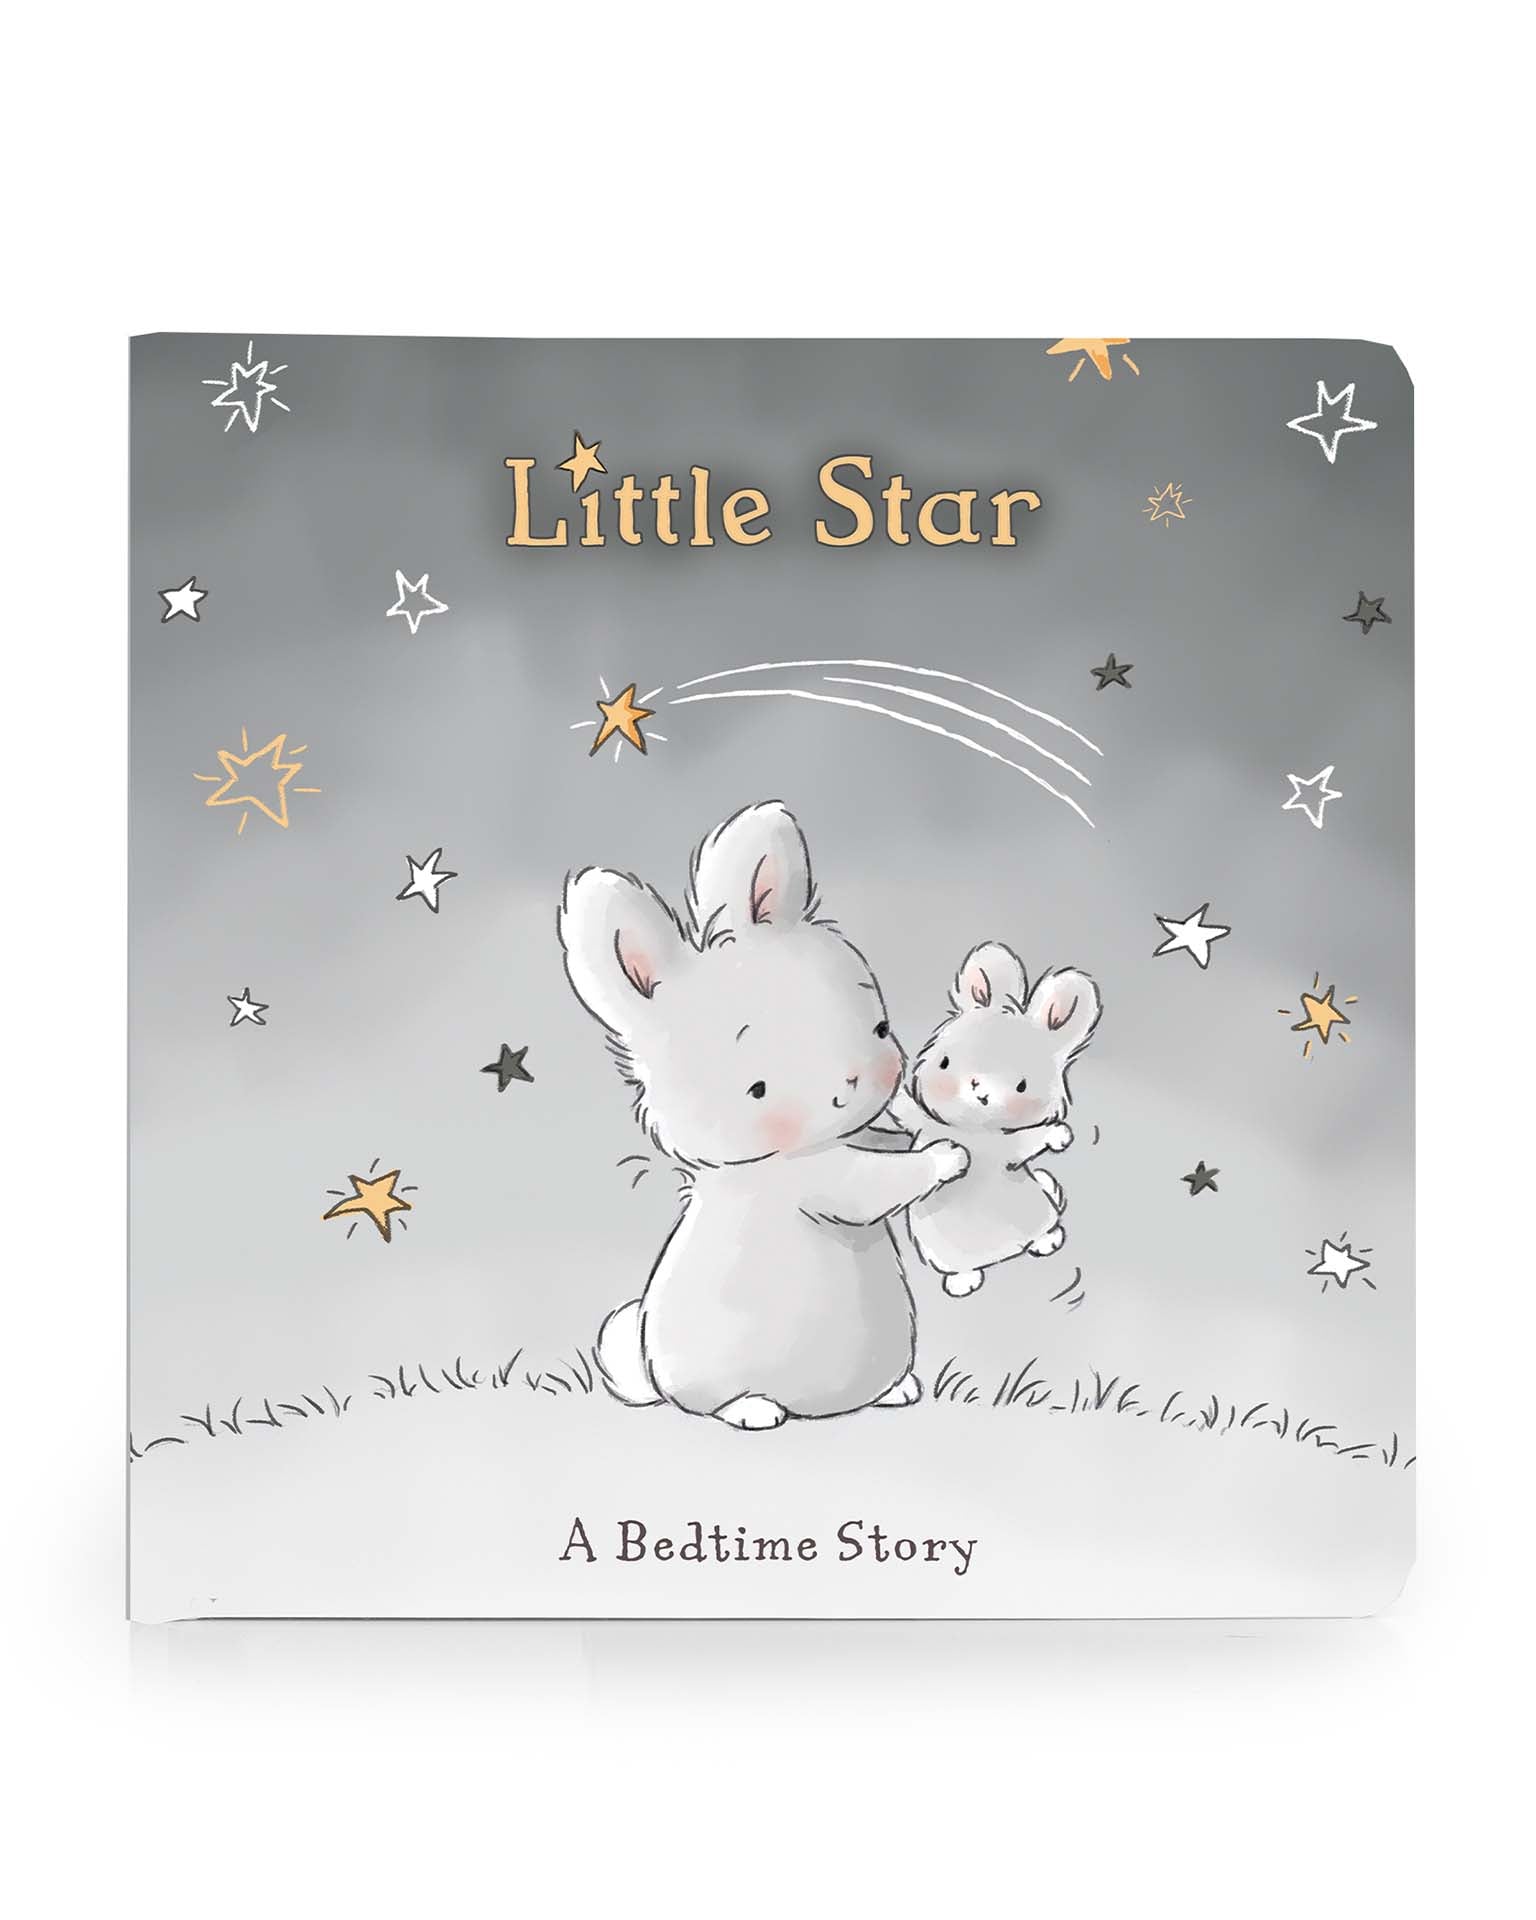 Little bunnies by the bay play little star board book